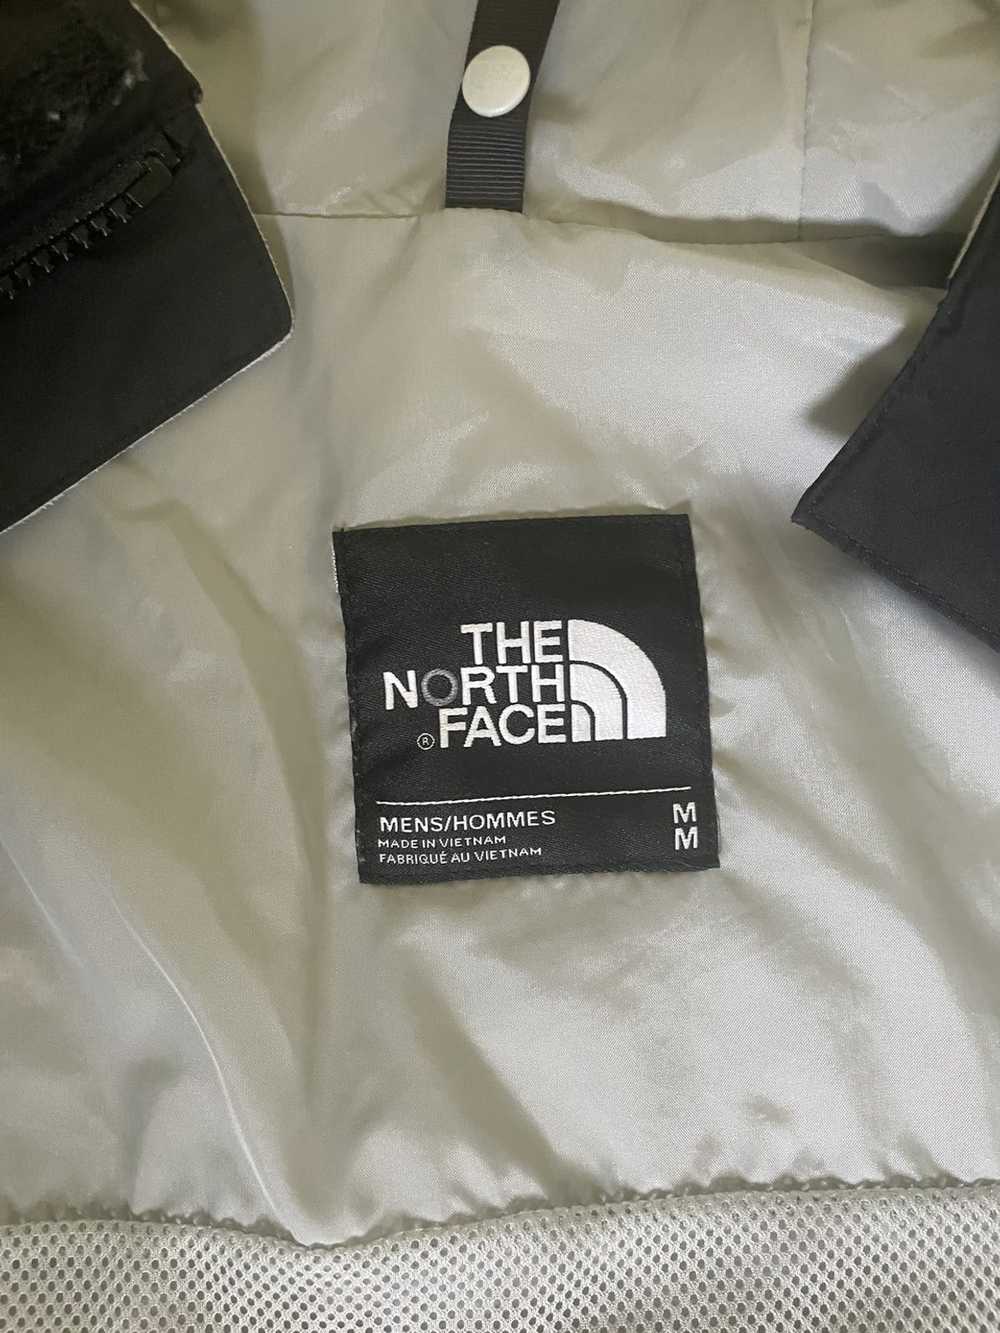 The North Face Vintage North Face Jacket - image 4